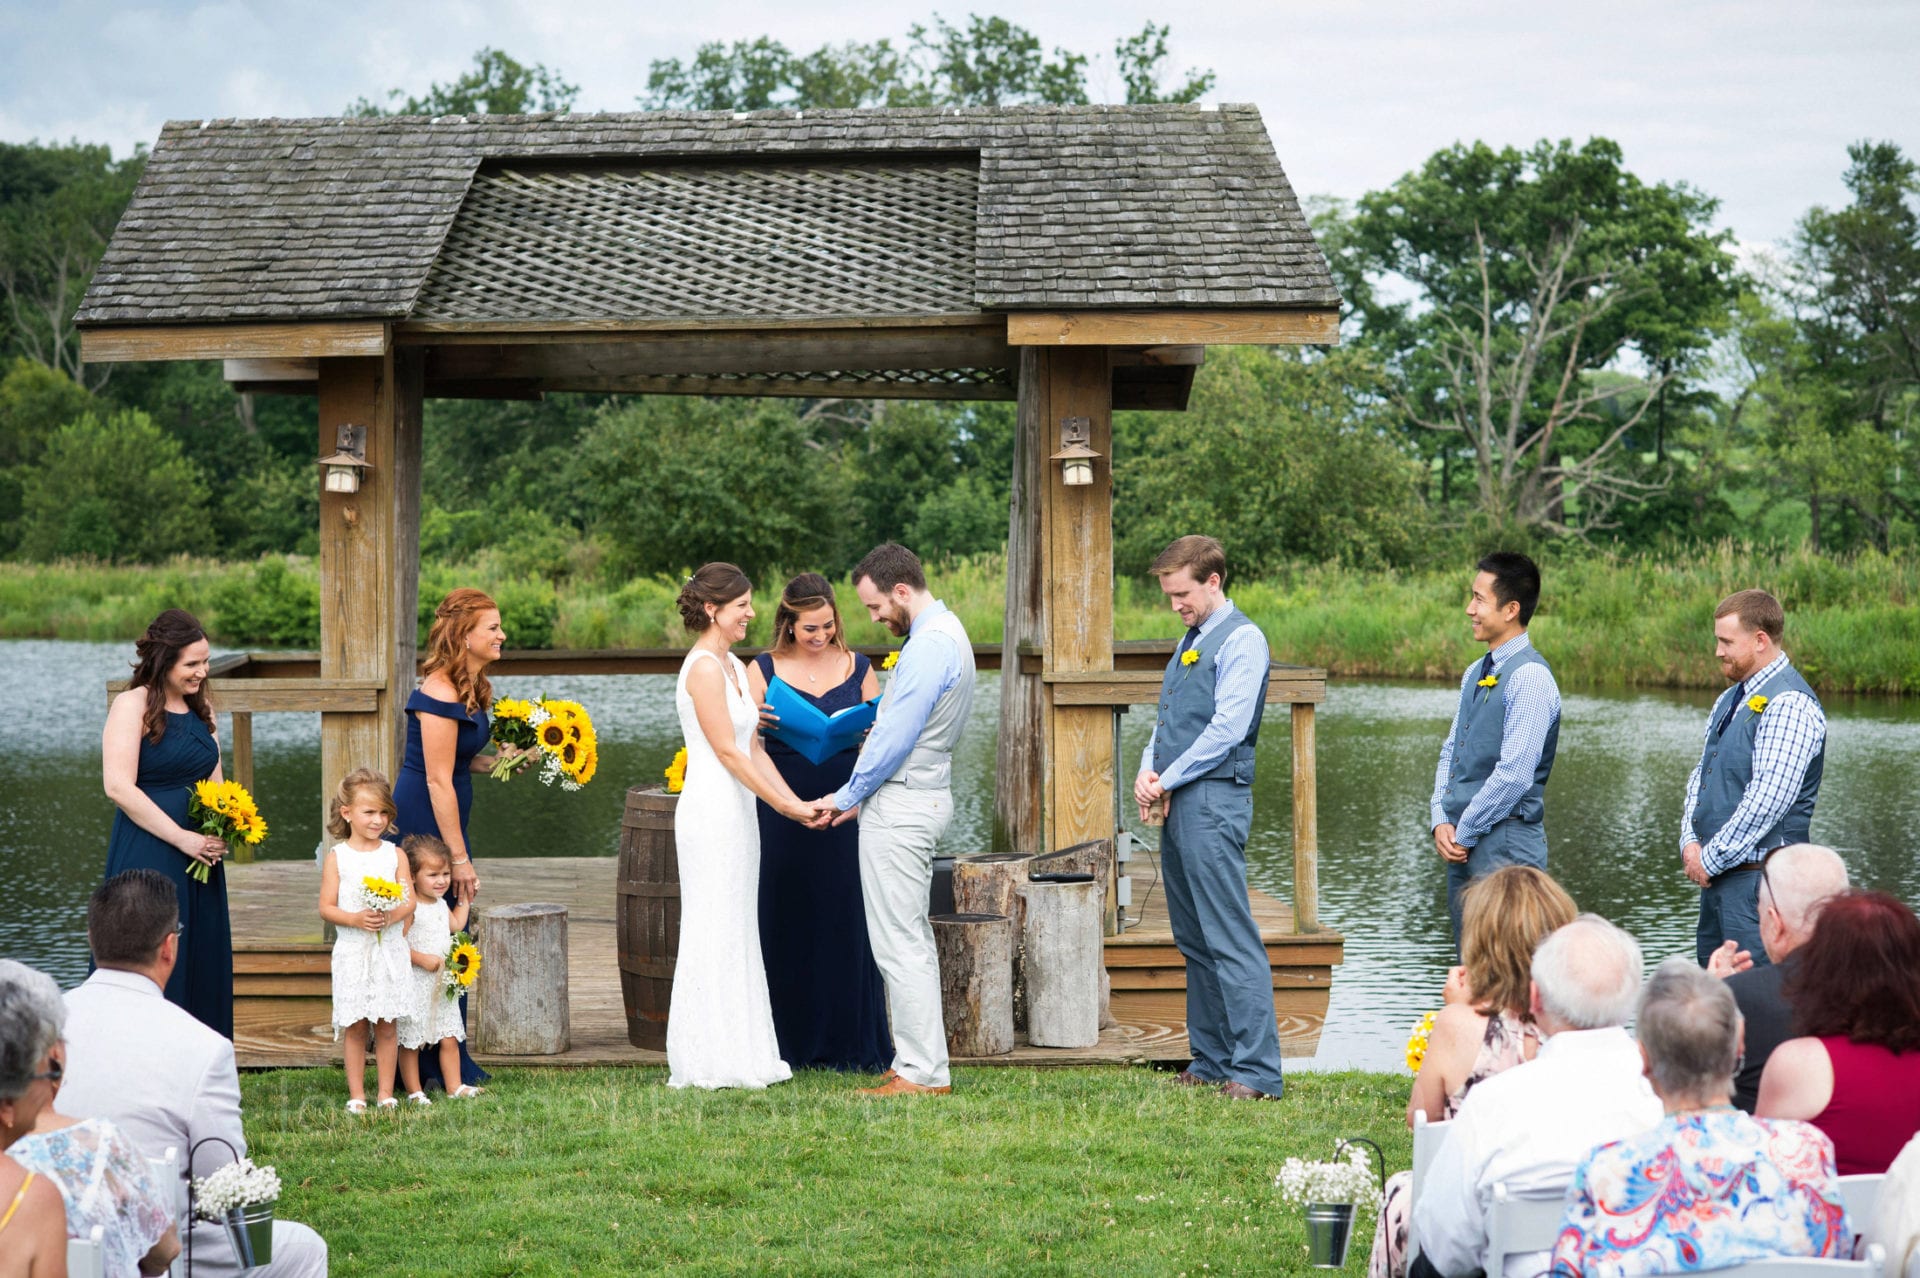 A bride and groom laugh while holding hands as they exchange vows. The backdrop is a pavilion on the edge of a pond. The bridal party stands on either side of the bride and groom. Armstrong Farms Weddings